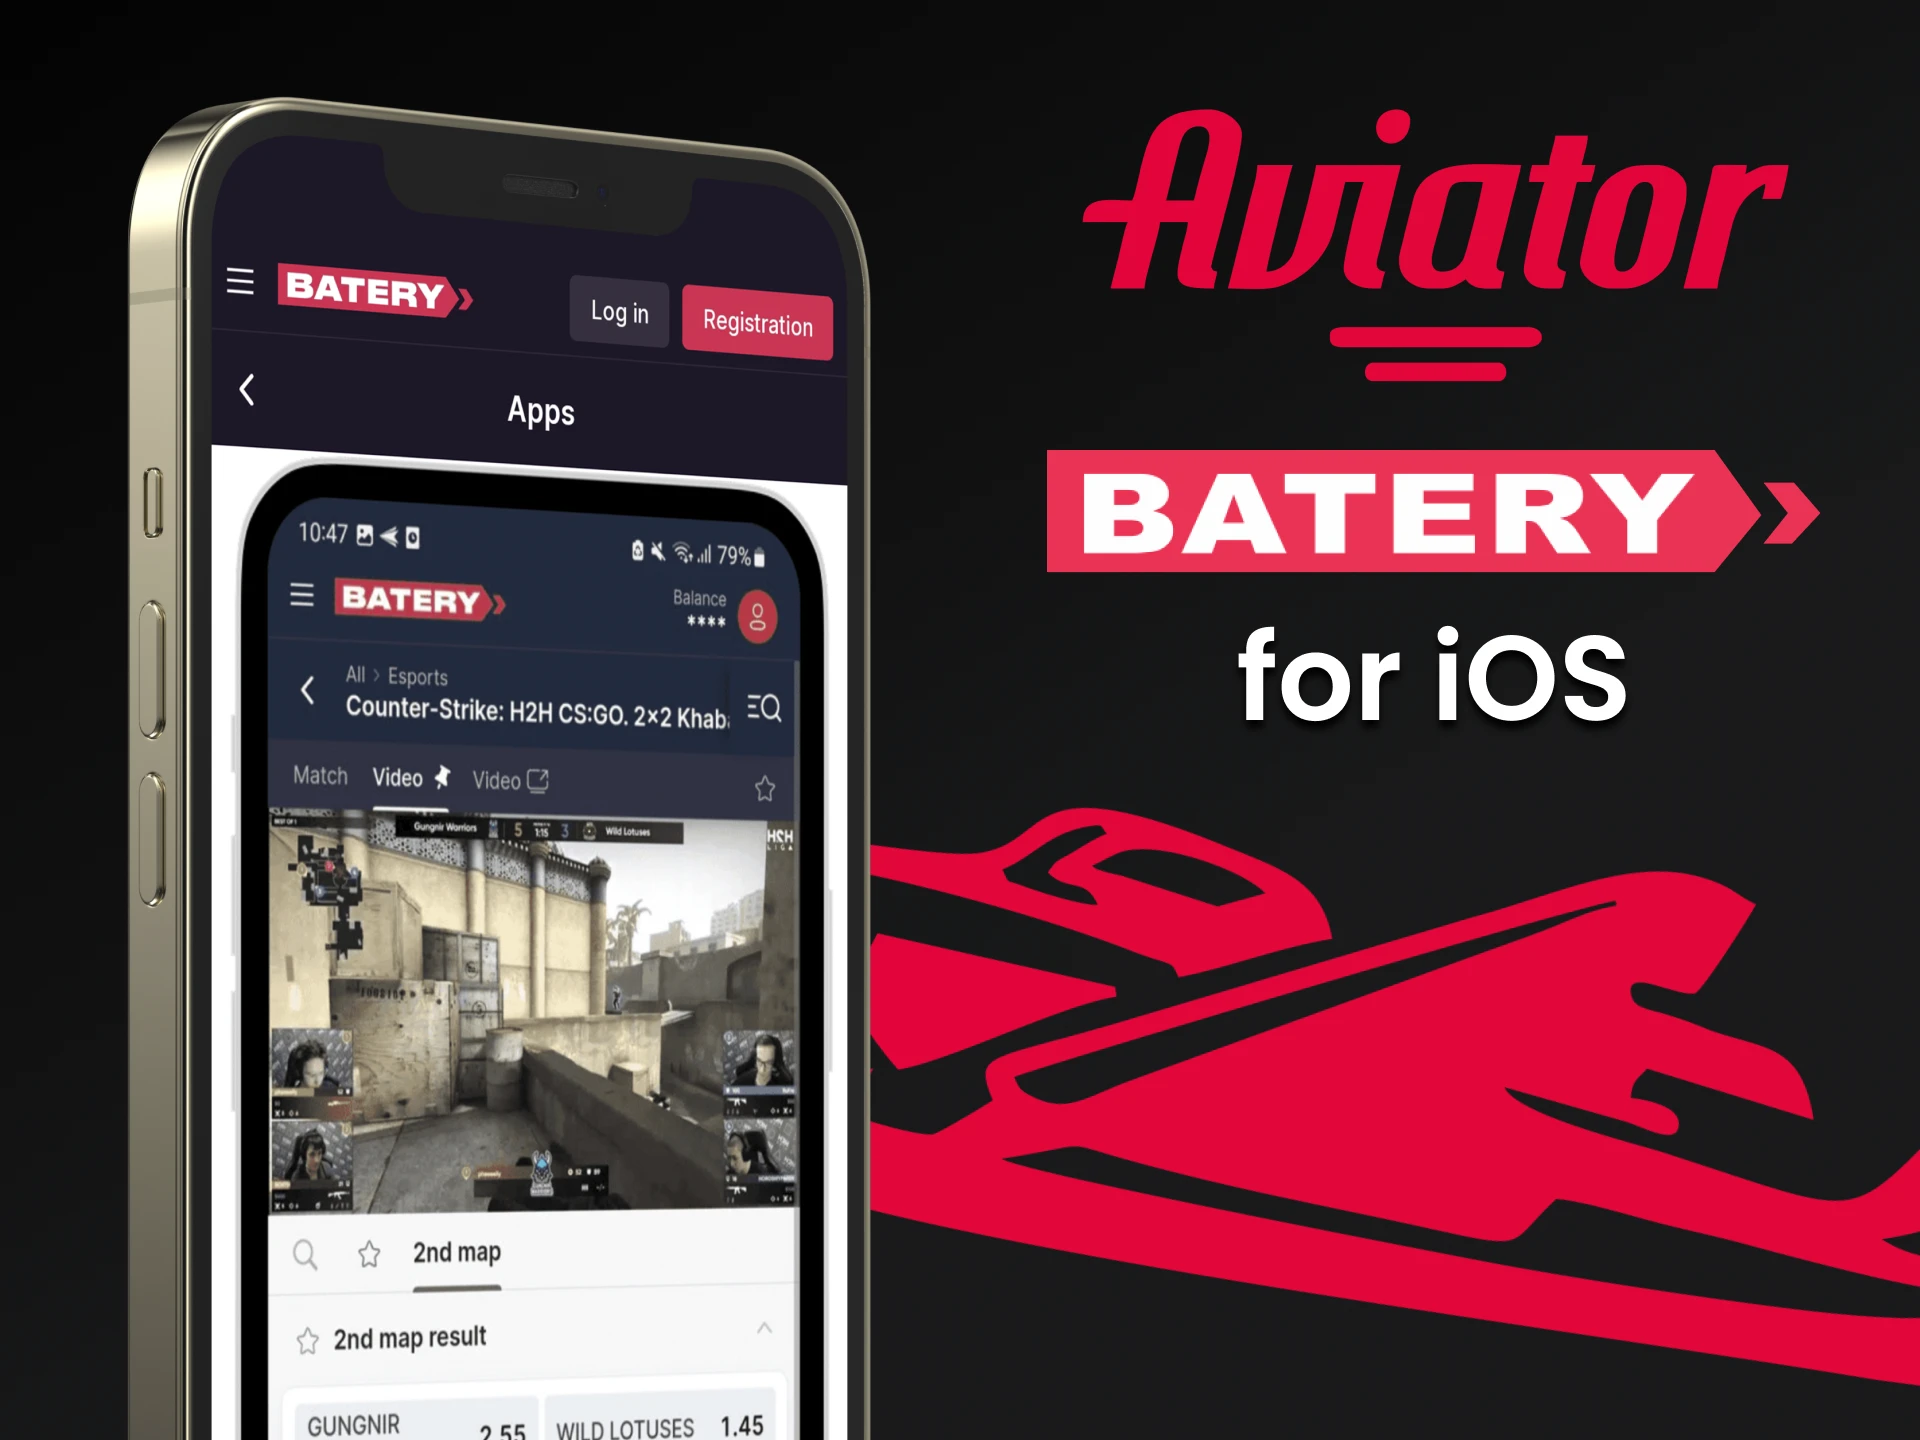 Download the Batery app on iOS to play Aviator on Batery.